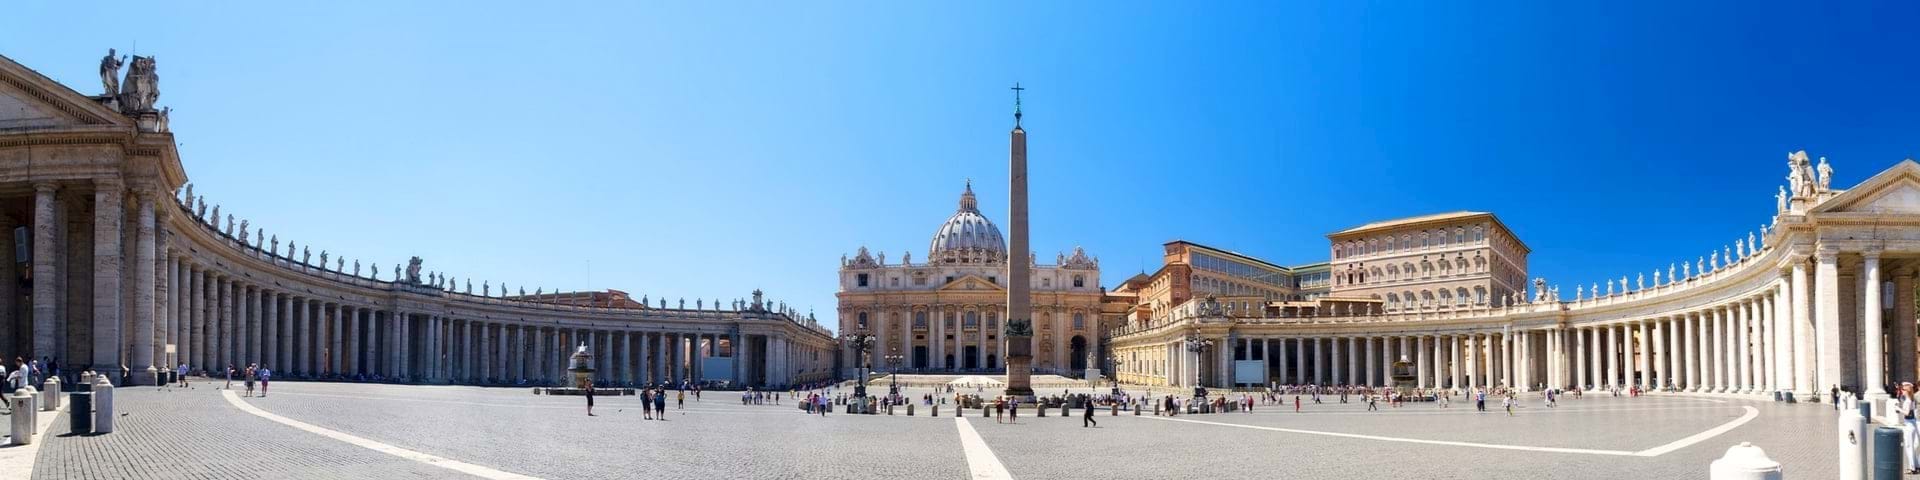 Private Tours of the Vatican